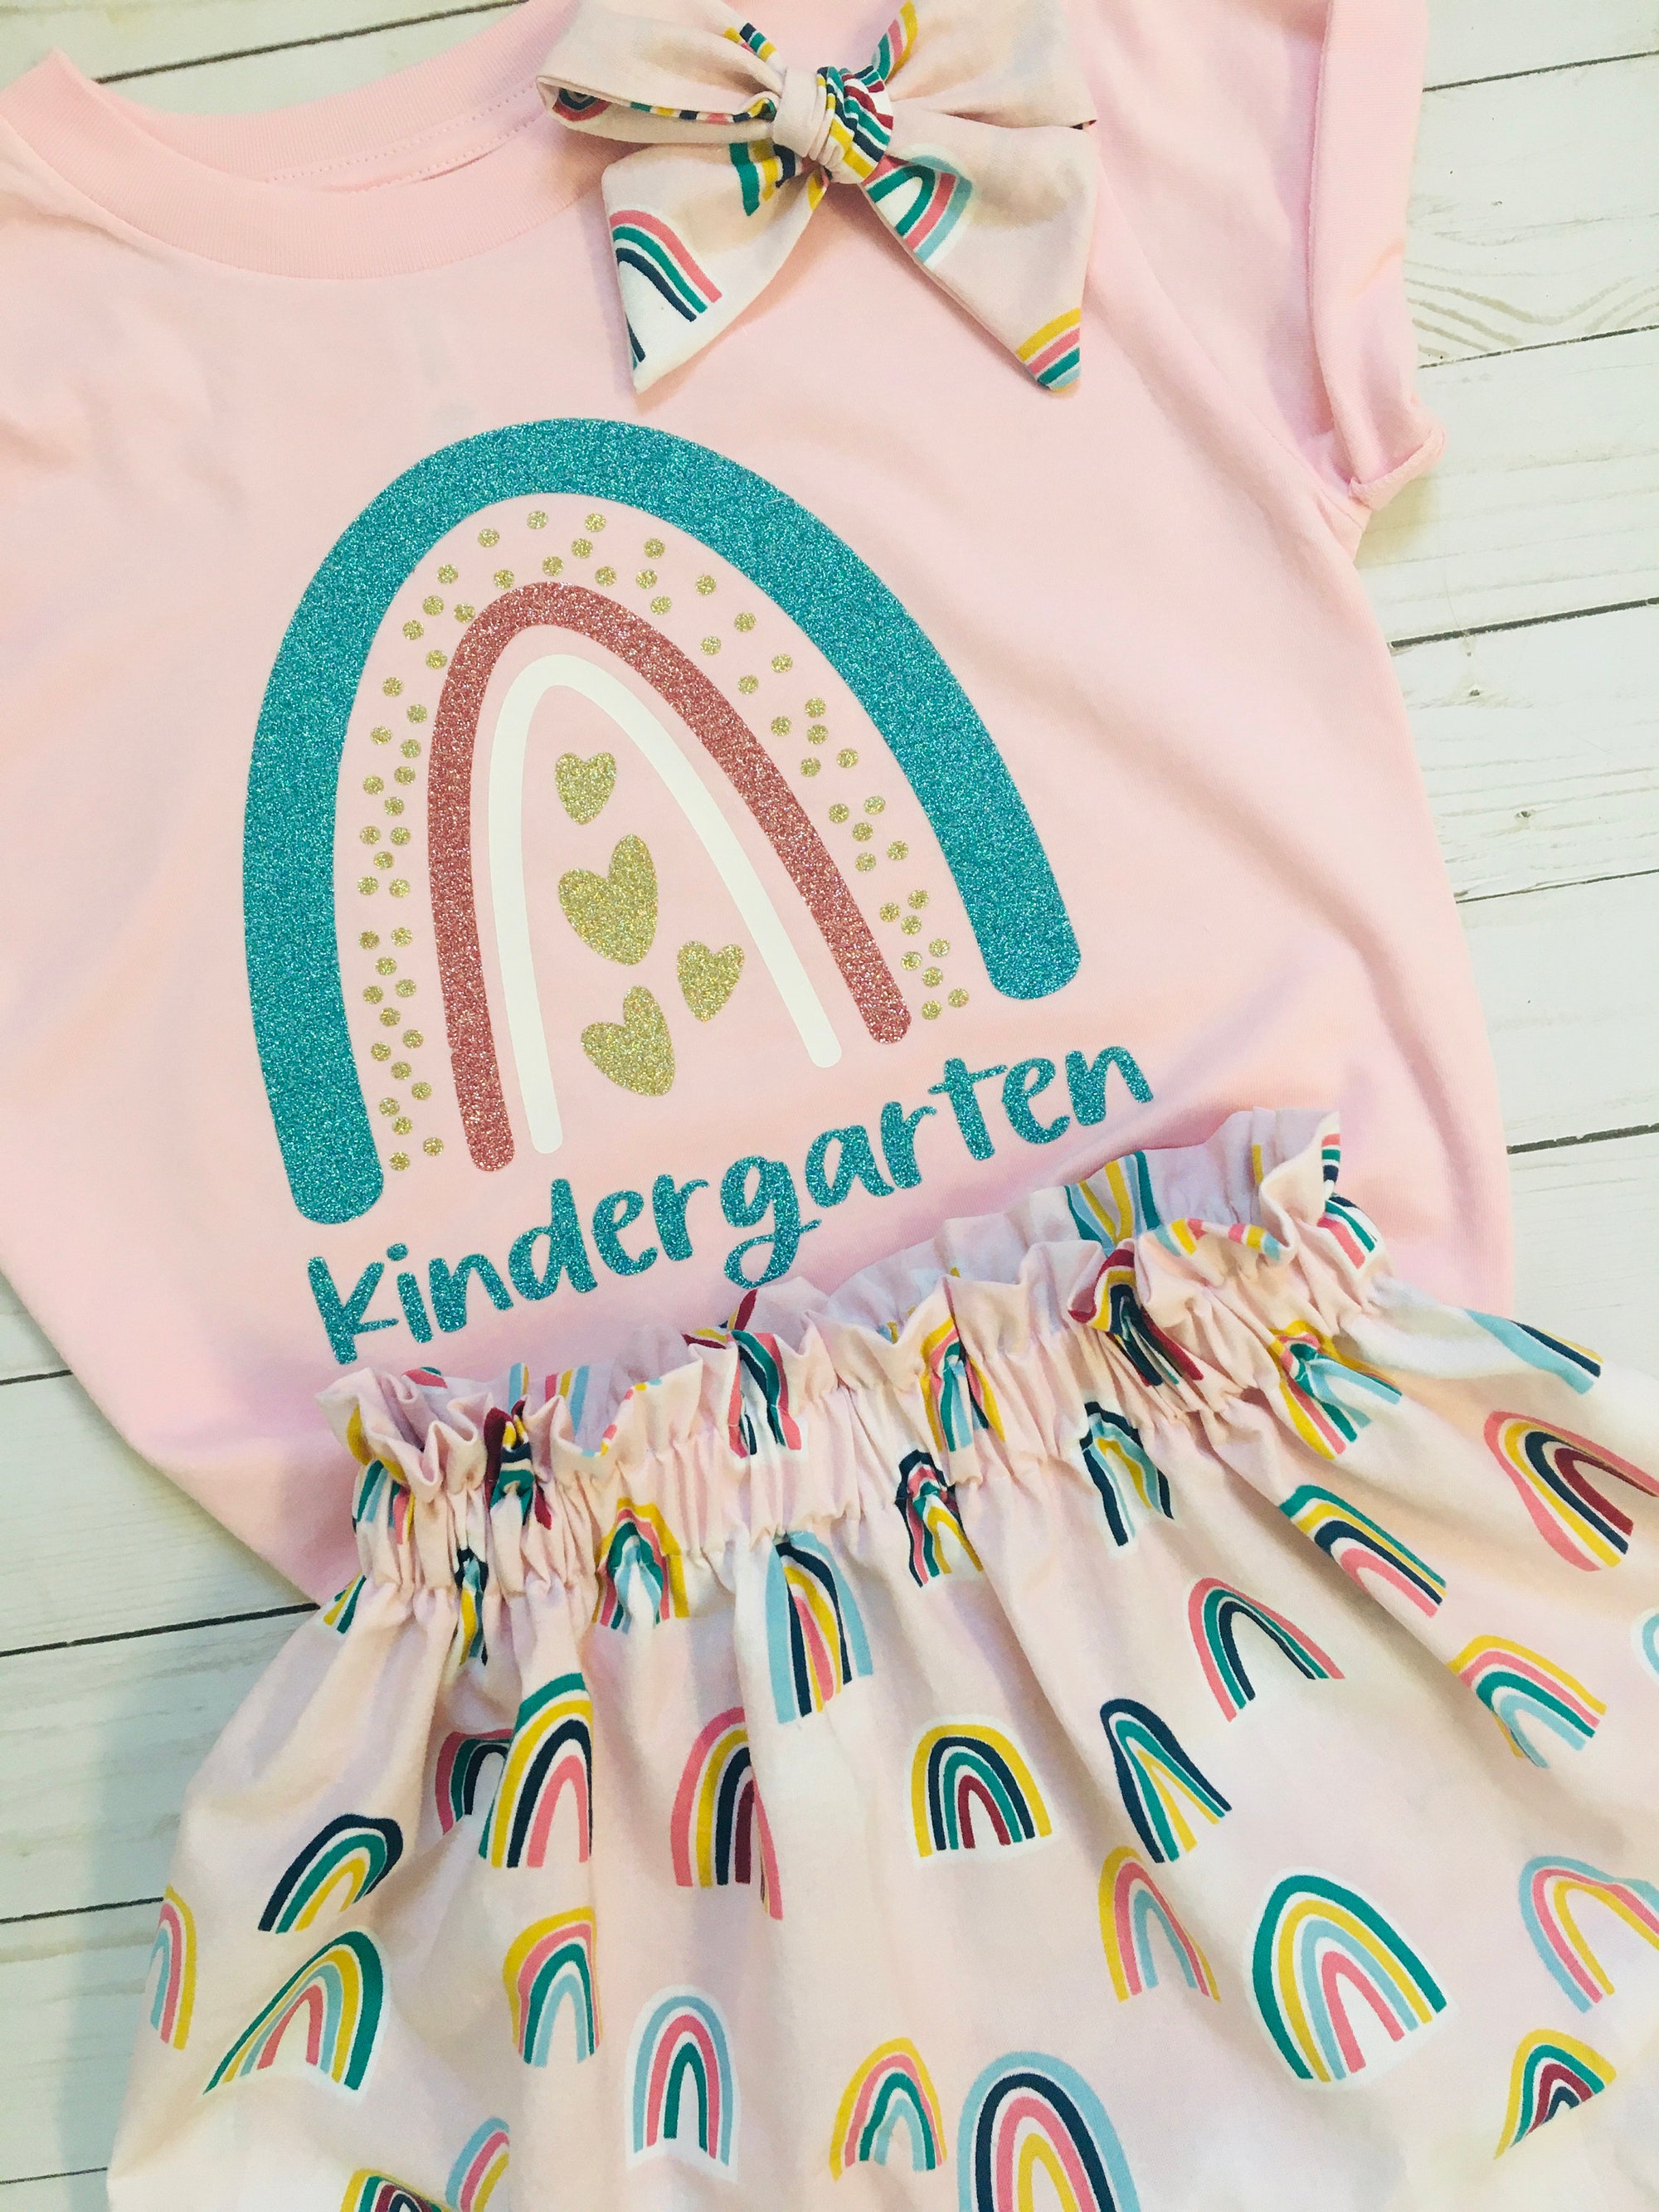 Kindergarten outfit, back to school, girls school outfit, first day of school